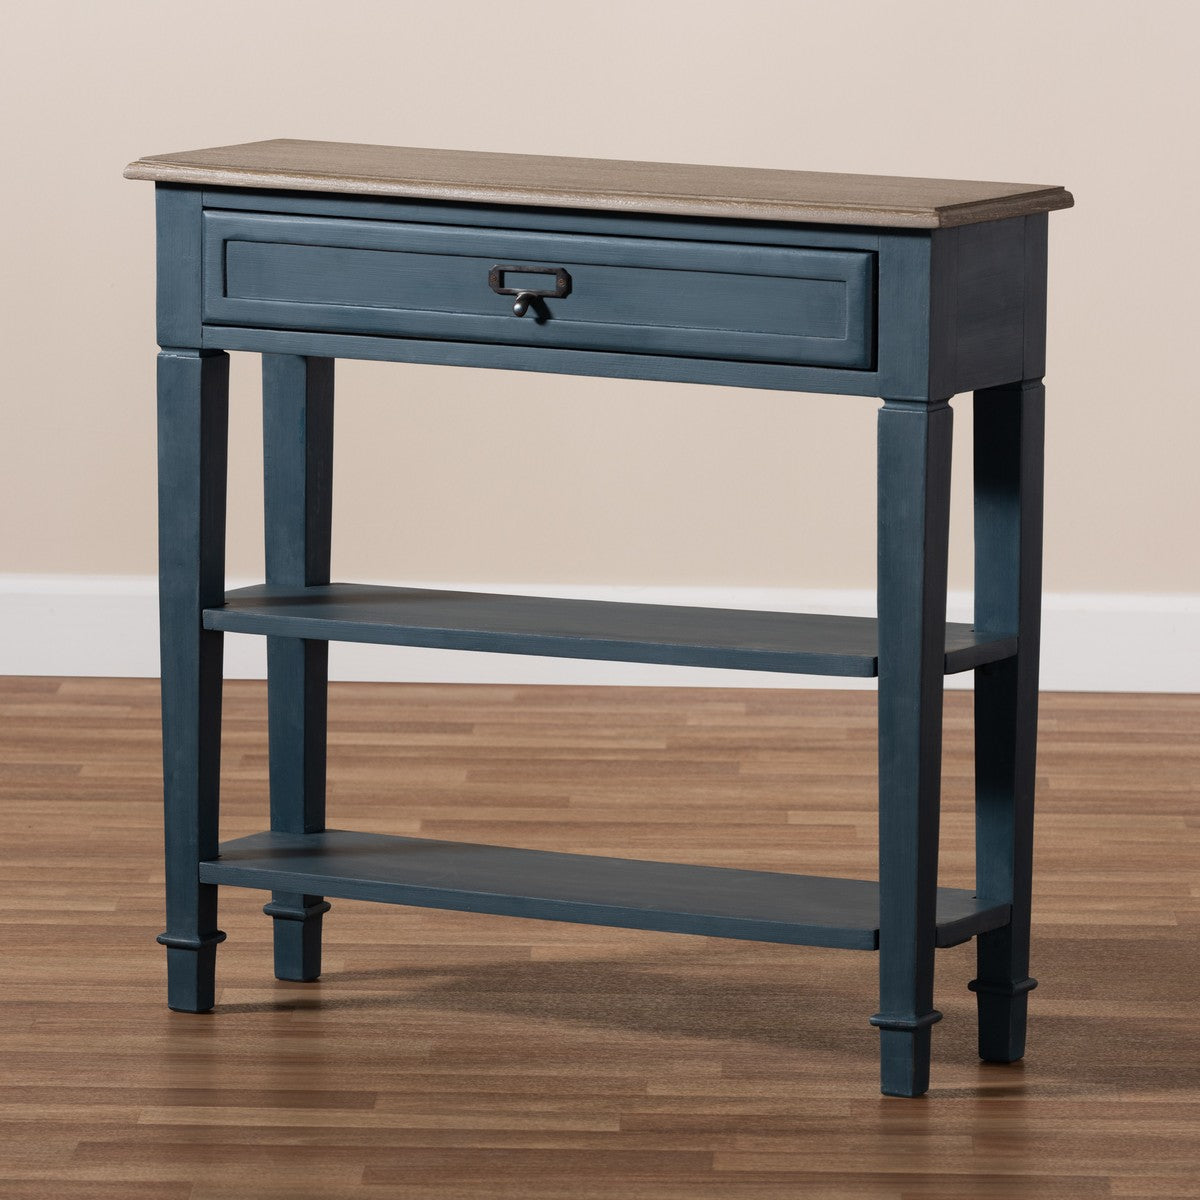 Baxton Studio Dauphine French Provincial Blue Spruce Fiinished Wood Accent Console Table